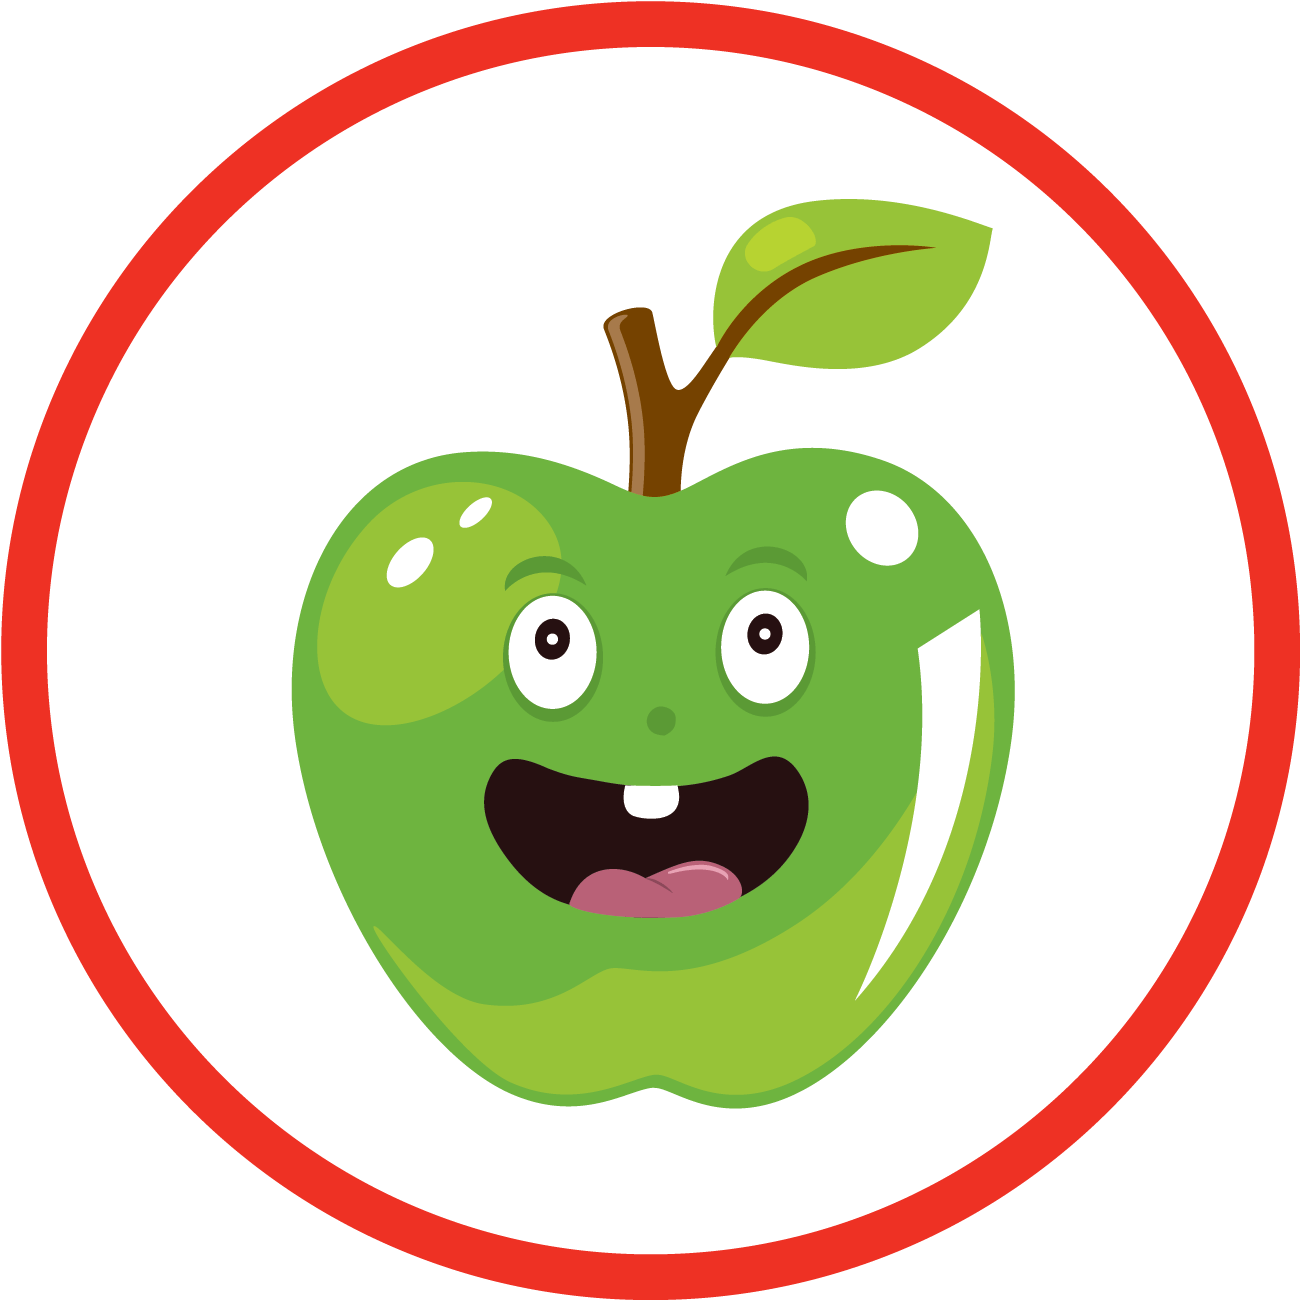 A Cartoon Apple With A Face And A Leaf In A Red Circle